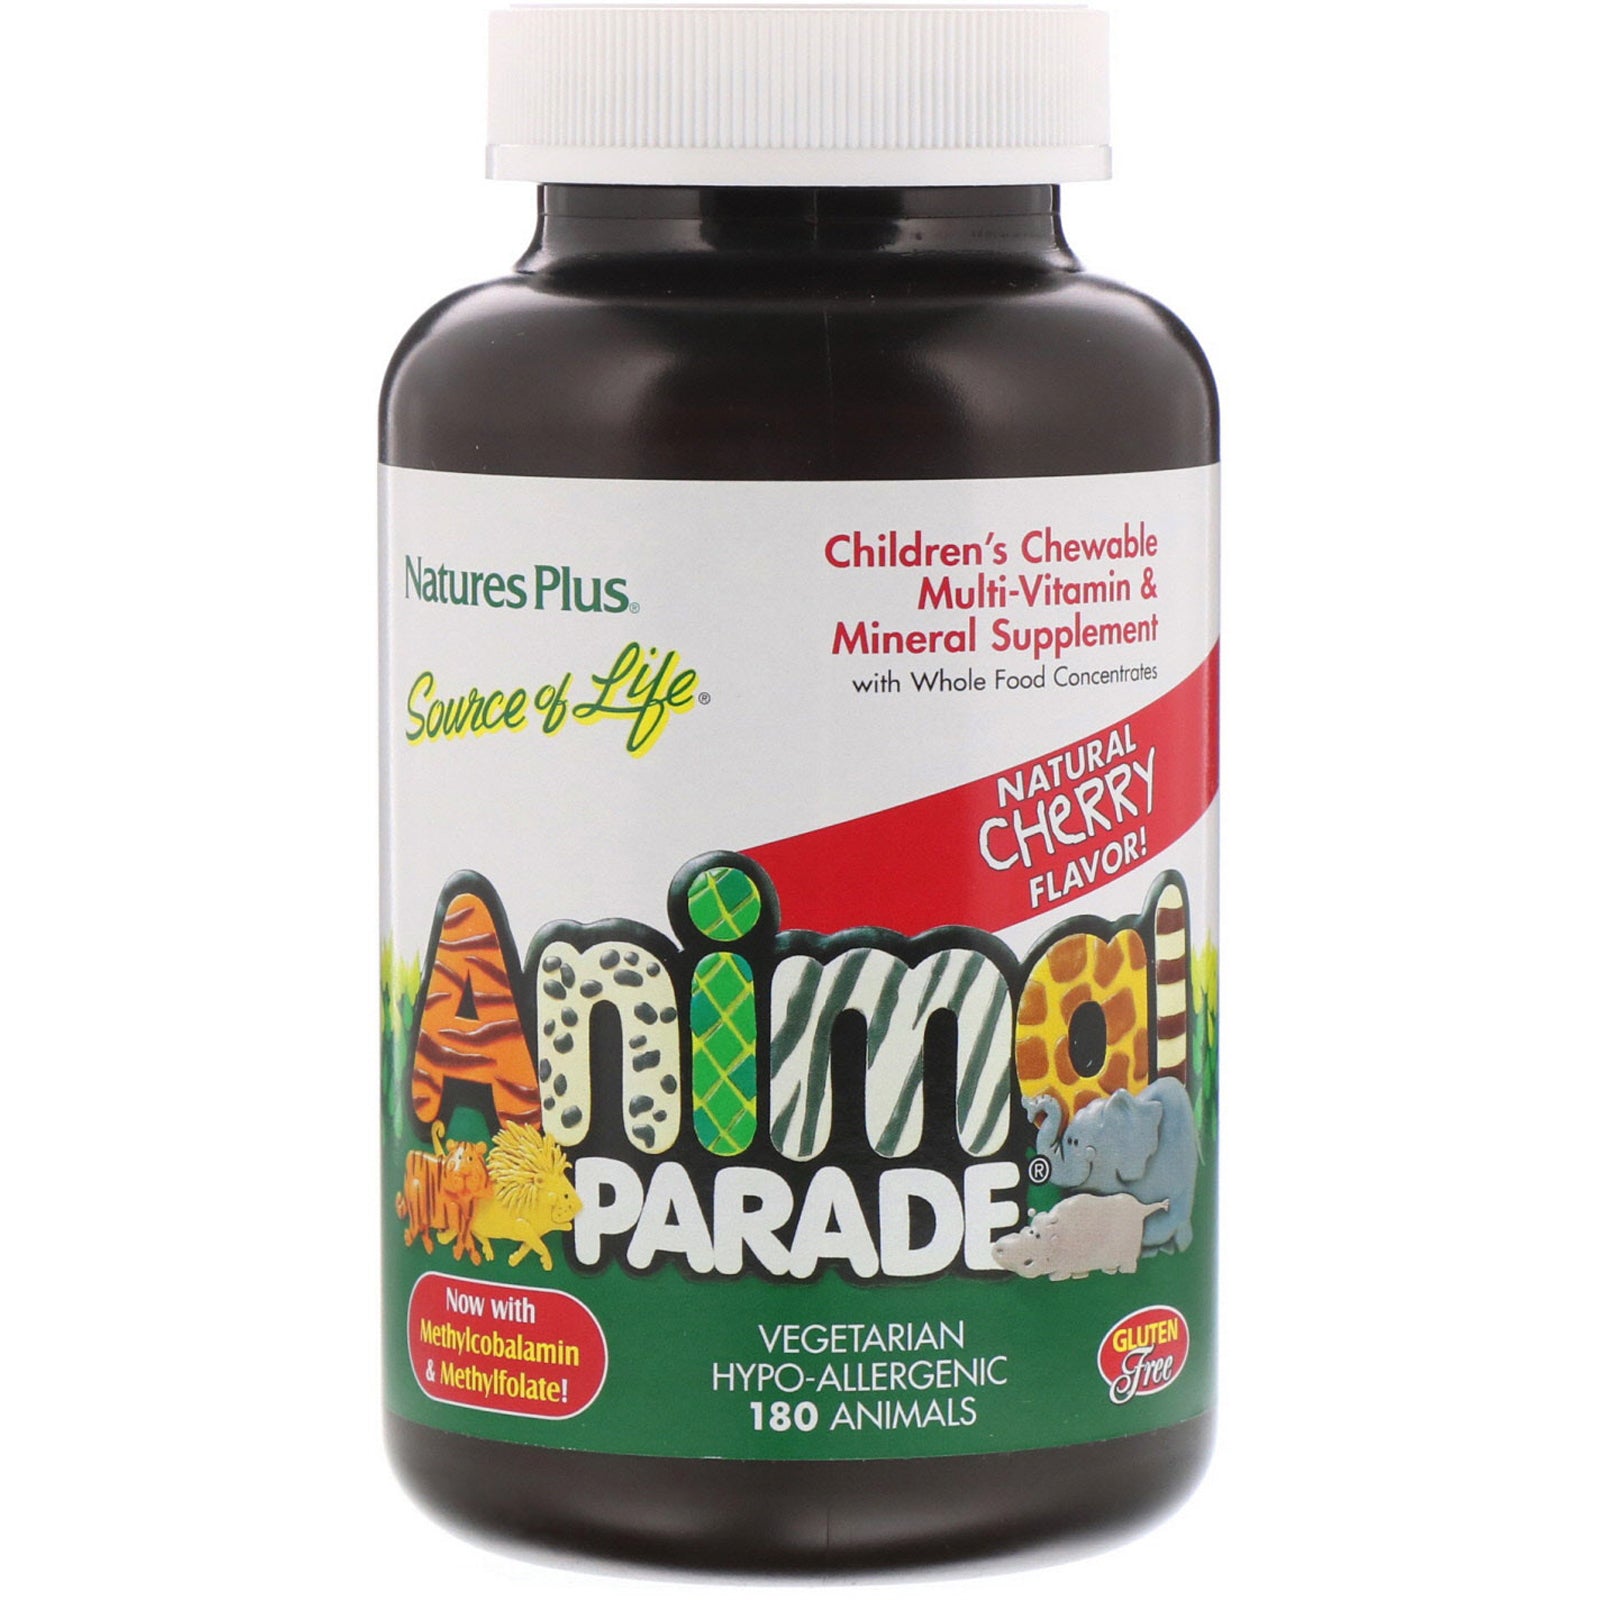 Nature's Plus, Source of Life, Animal Parade, Children's Chewable Multi-Vitamin and Mineral Supplement, Natural Cherry Flavor, 180 Animals